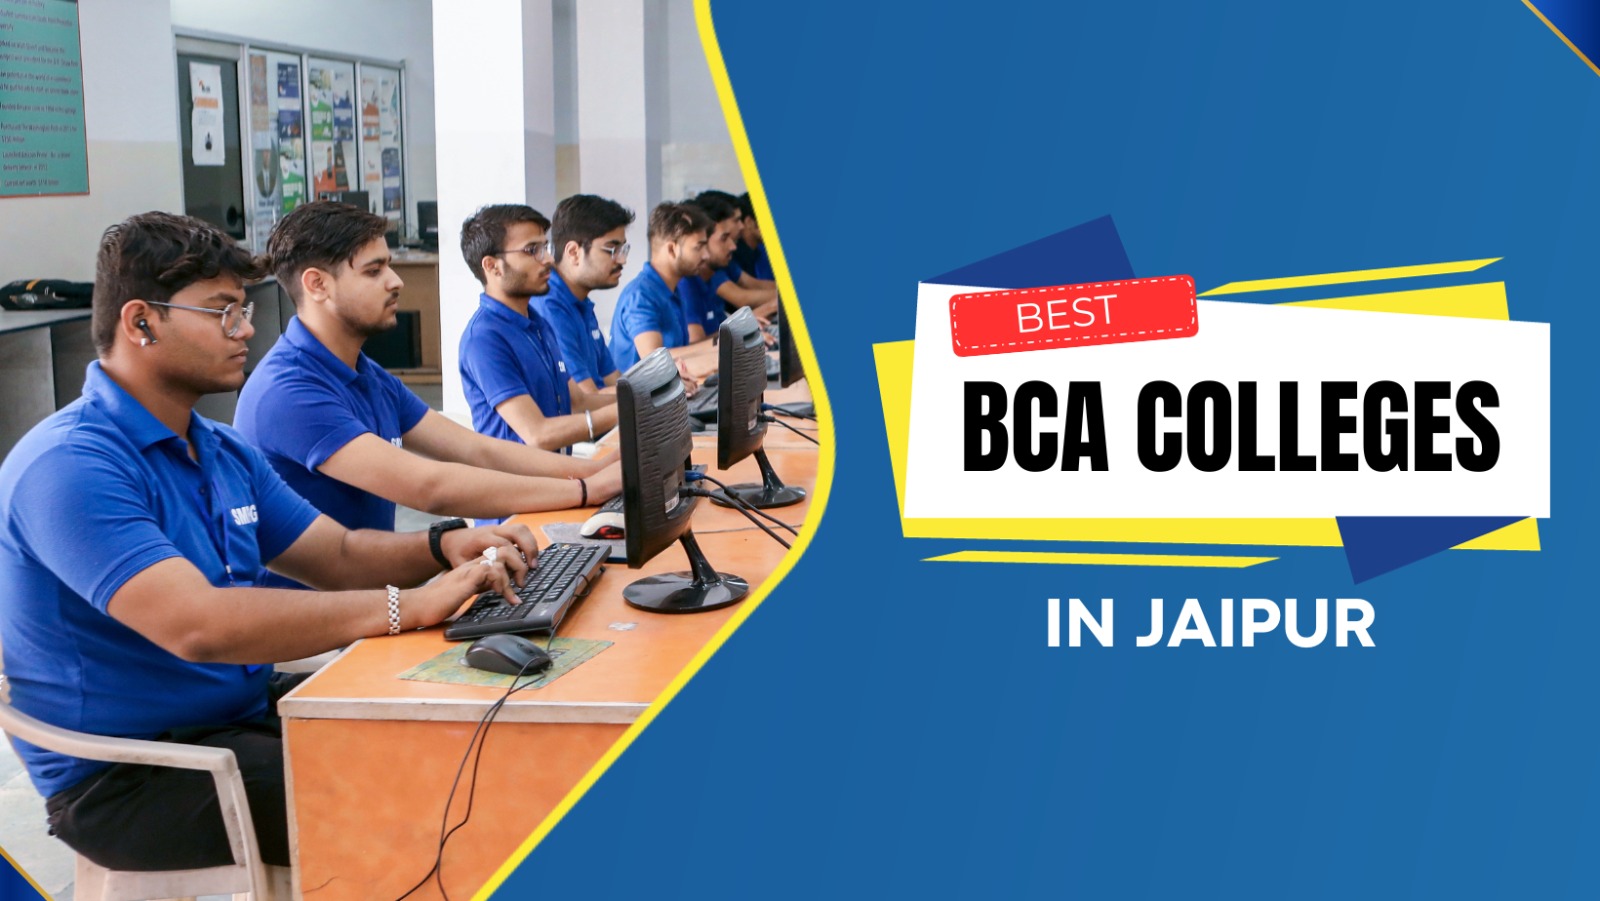 Best BCA Colleges in Jaipur with Highest Placement